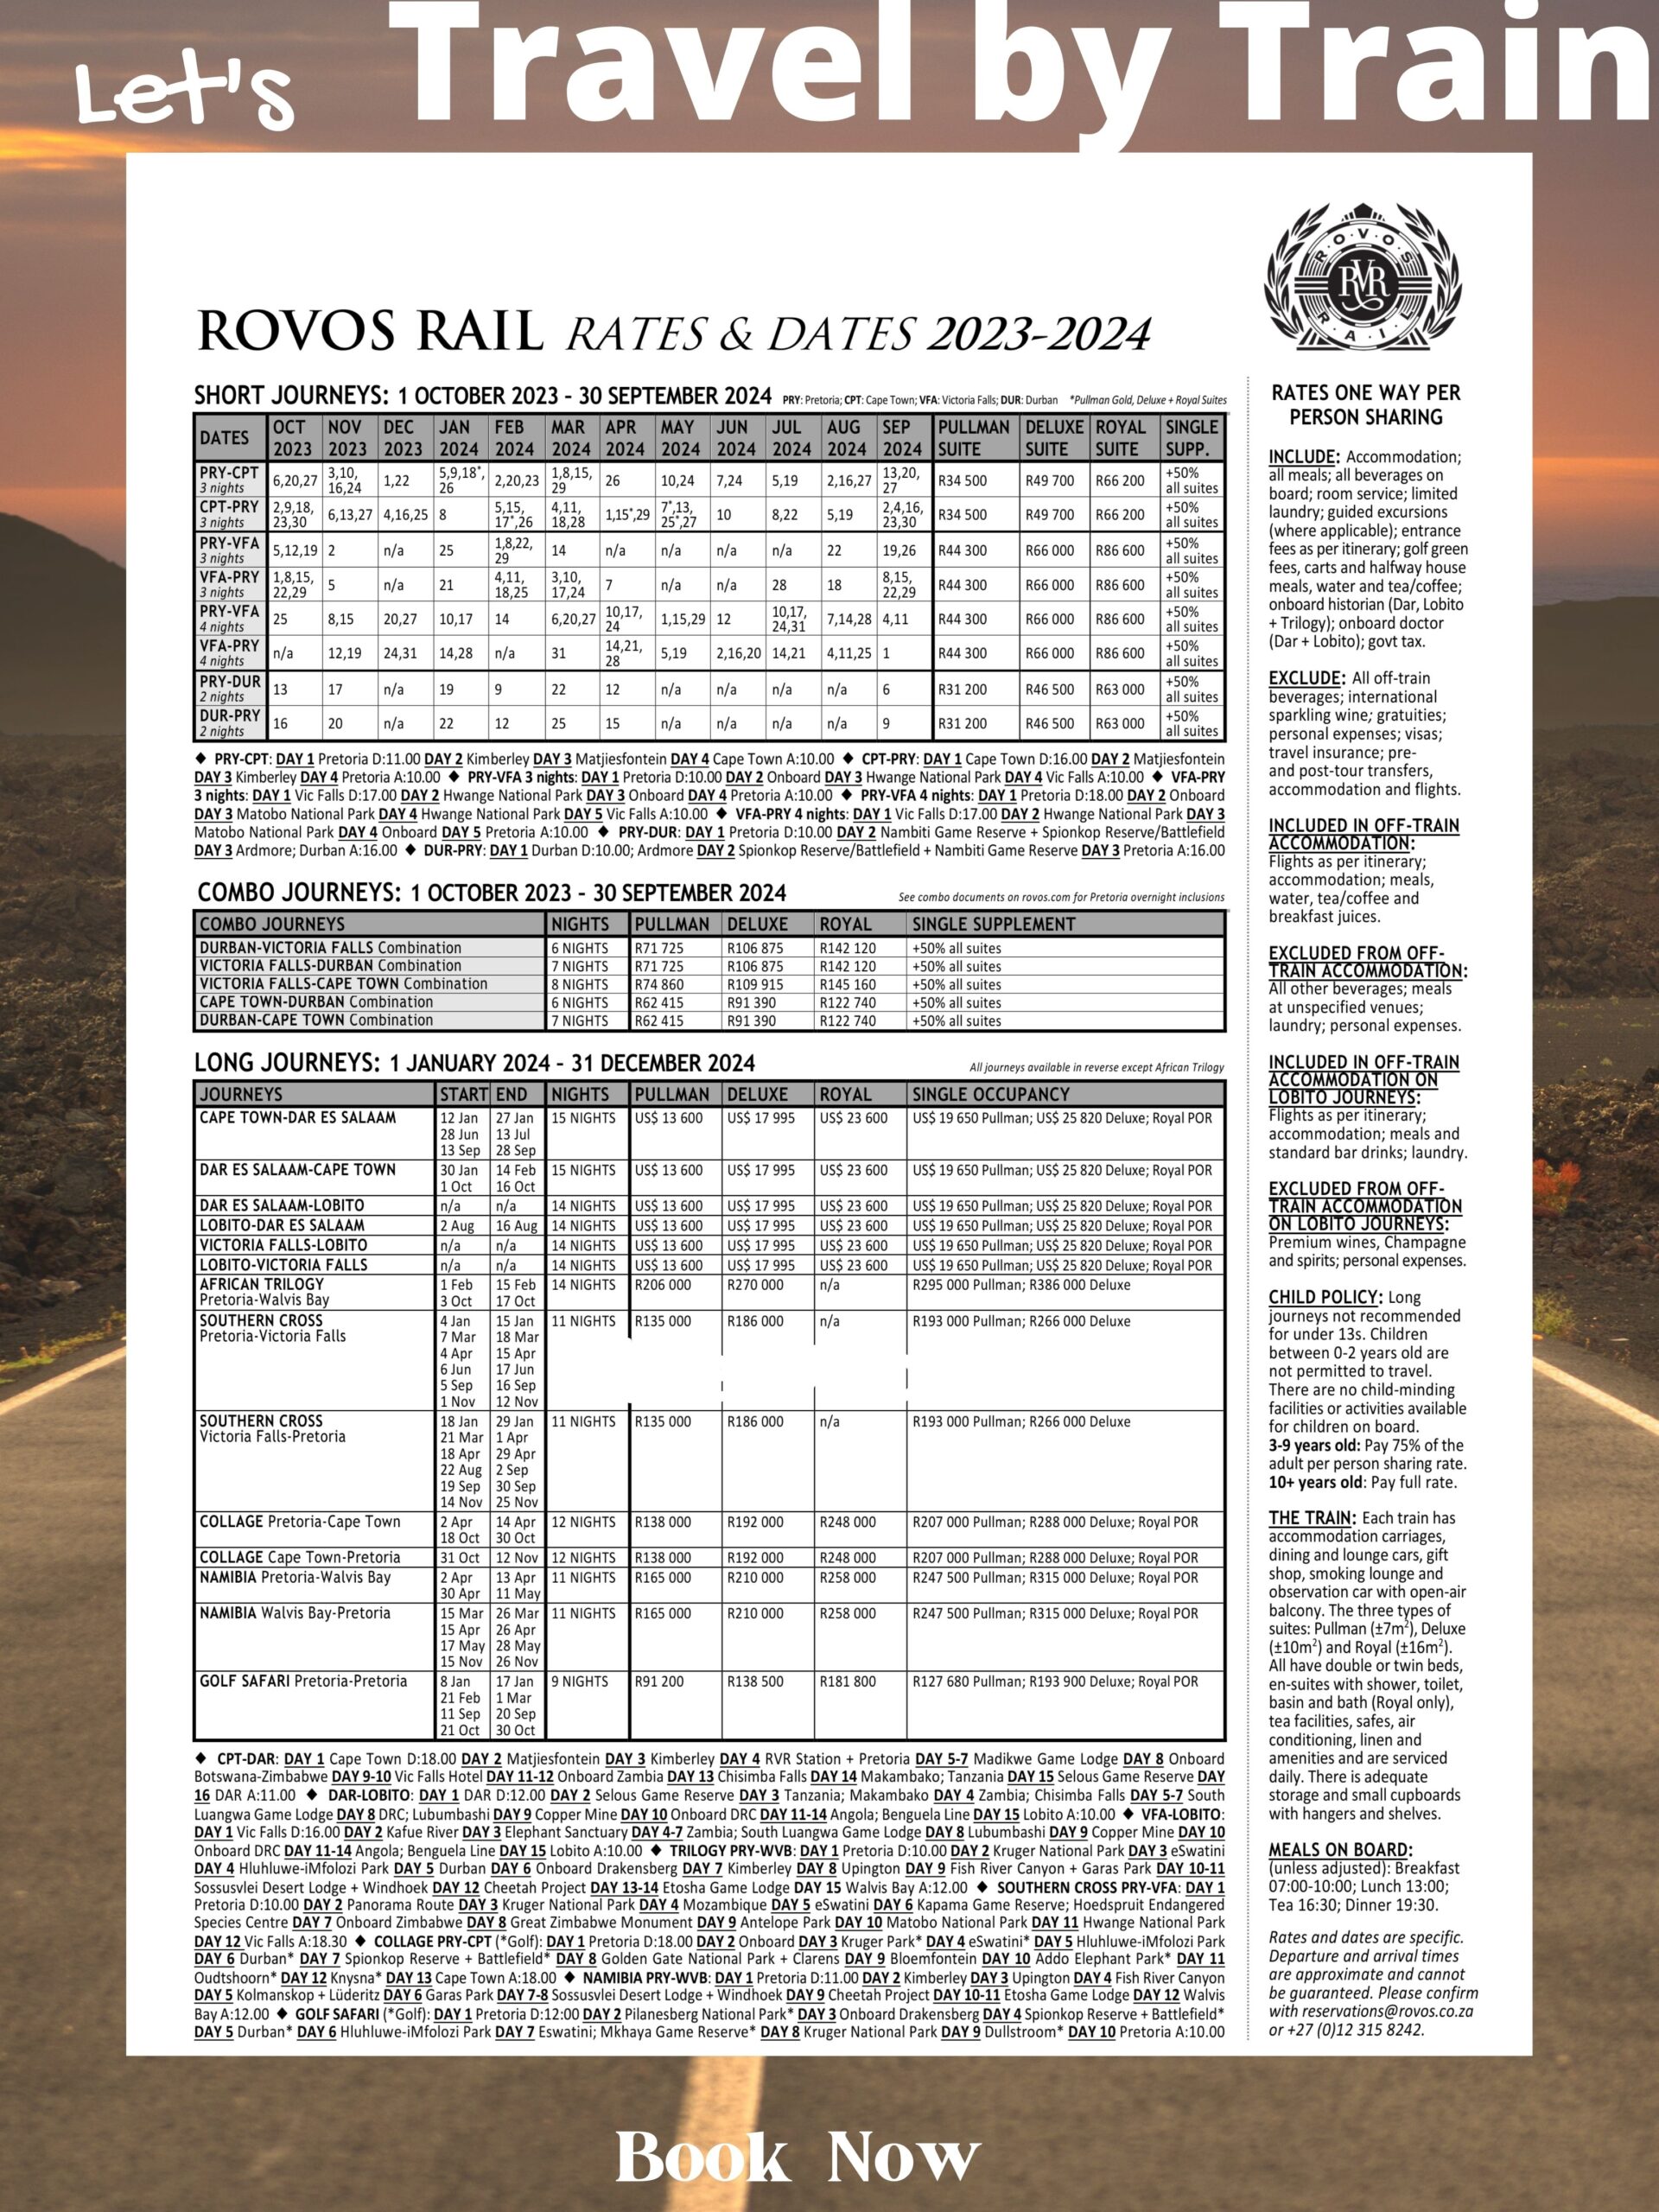 Rovos Rail Cost 2024